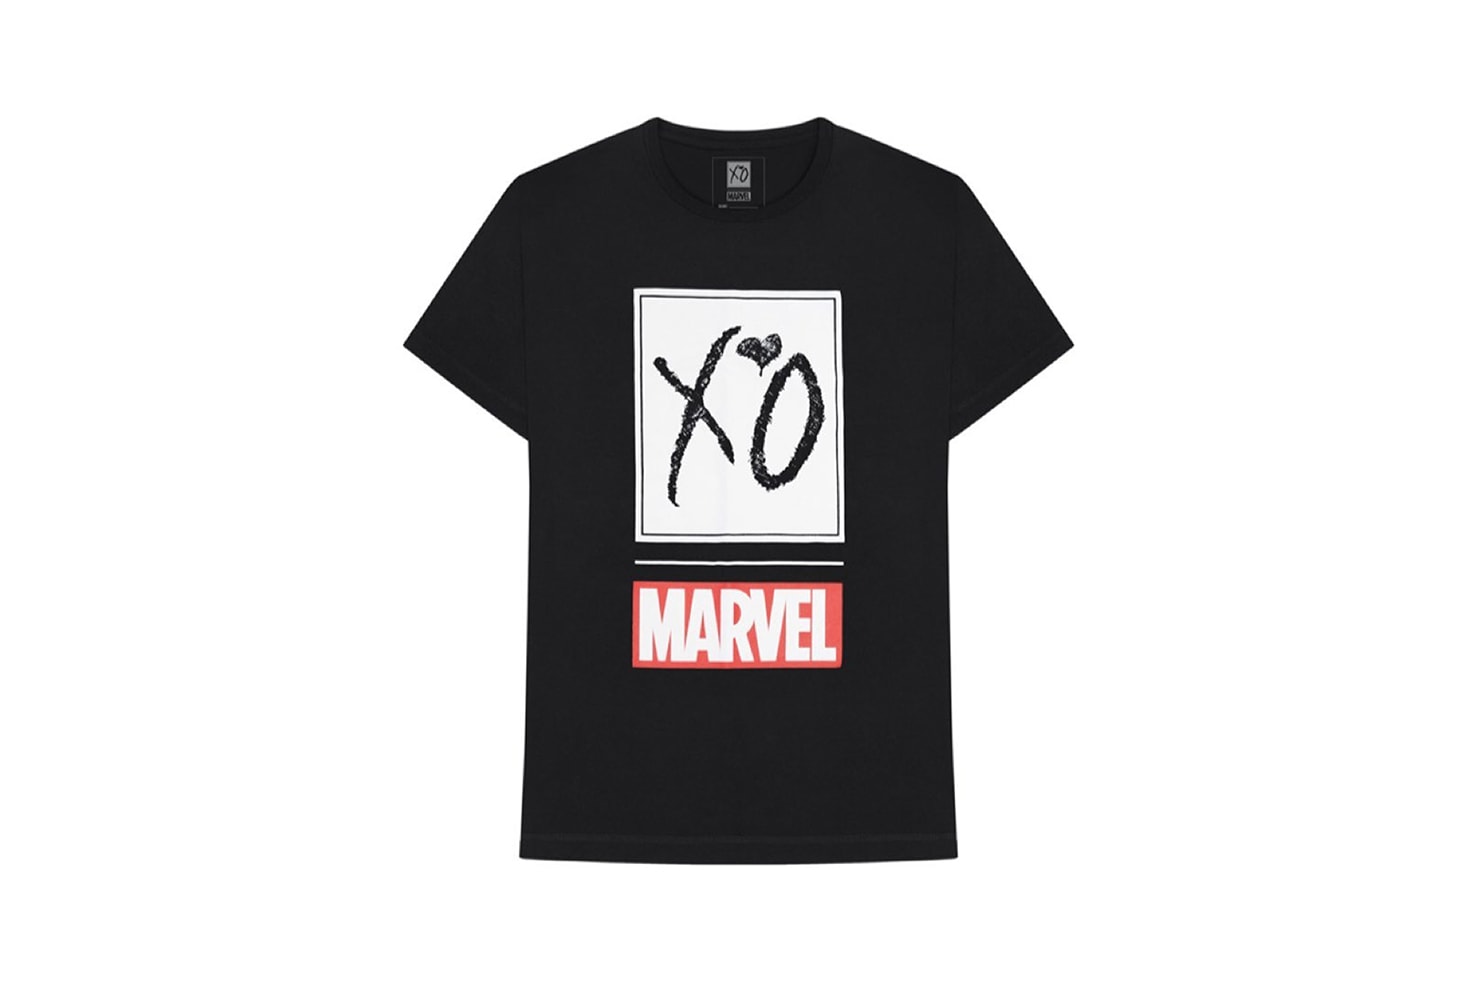 The Weeknd Marvel Comic Collection Collab T-Shirts Hoodies Jackets Caps Marvel XO Release Date Availability Pricing May 18